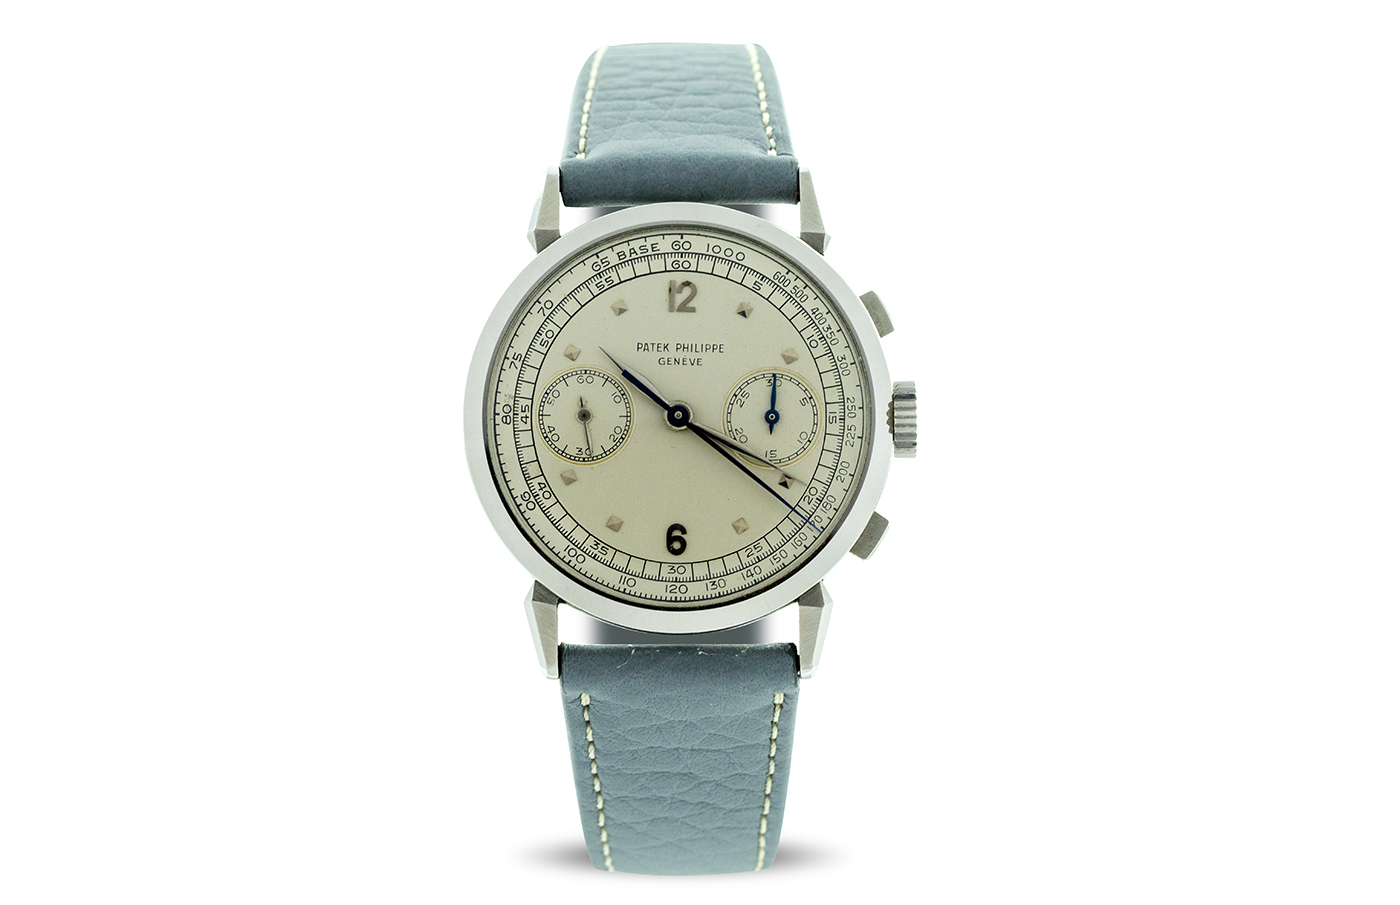 Patek Philippe Ref. 1579 A chronograph, made around 1950, in stainless steel chronograph, silvered dial with applied indexes, tachometer scale, case with spider lugs. One of only 6 made.